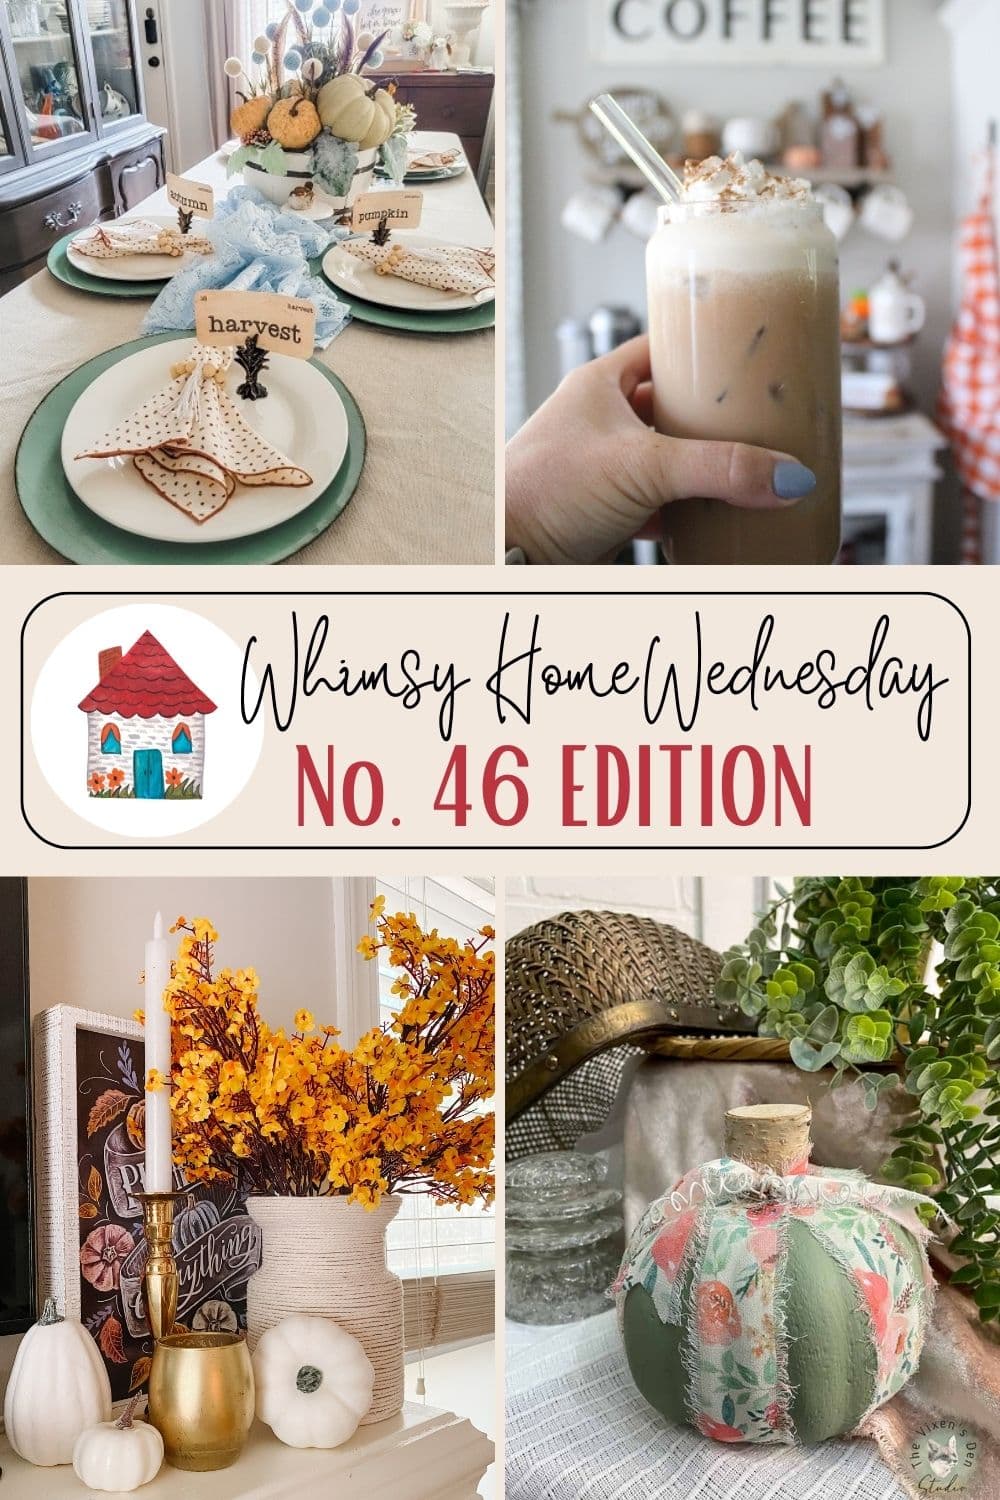 Join us on Whimsy Home Wednesday Blog Link Party No. 46 and see host projects, the features from the previous week and link up your posts!